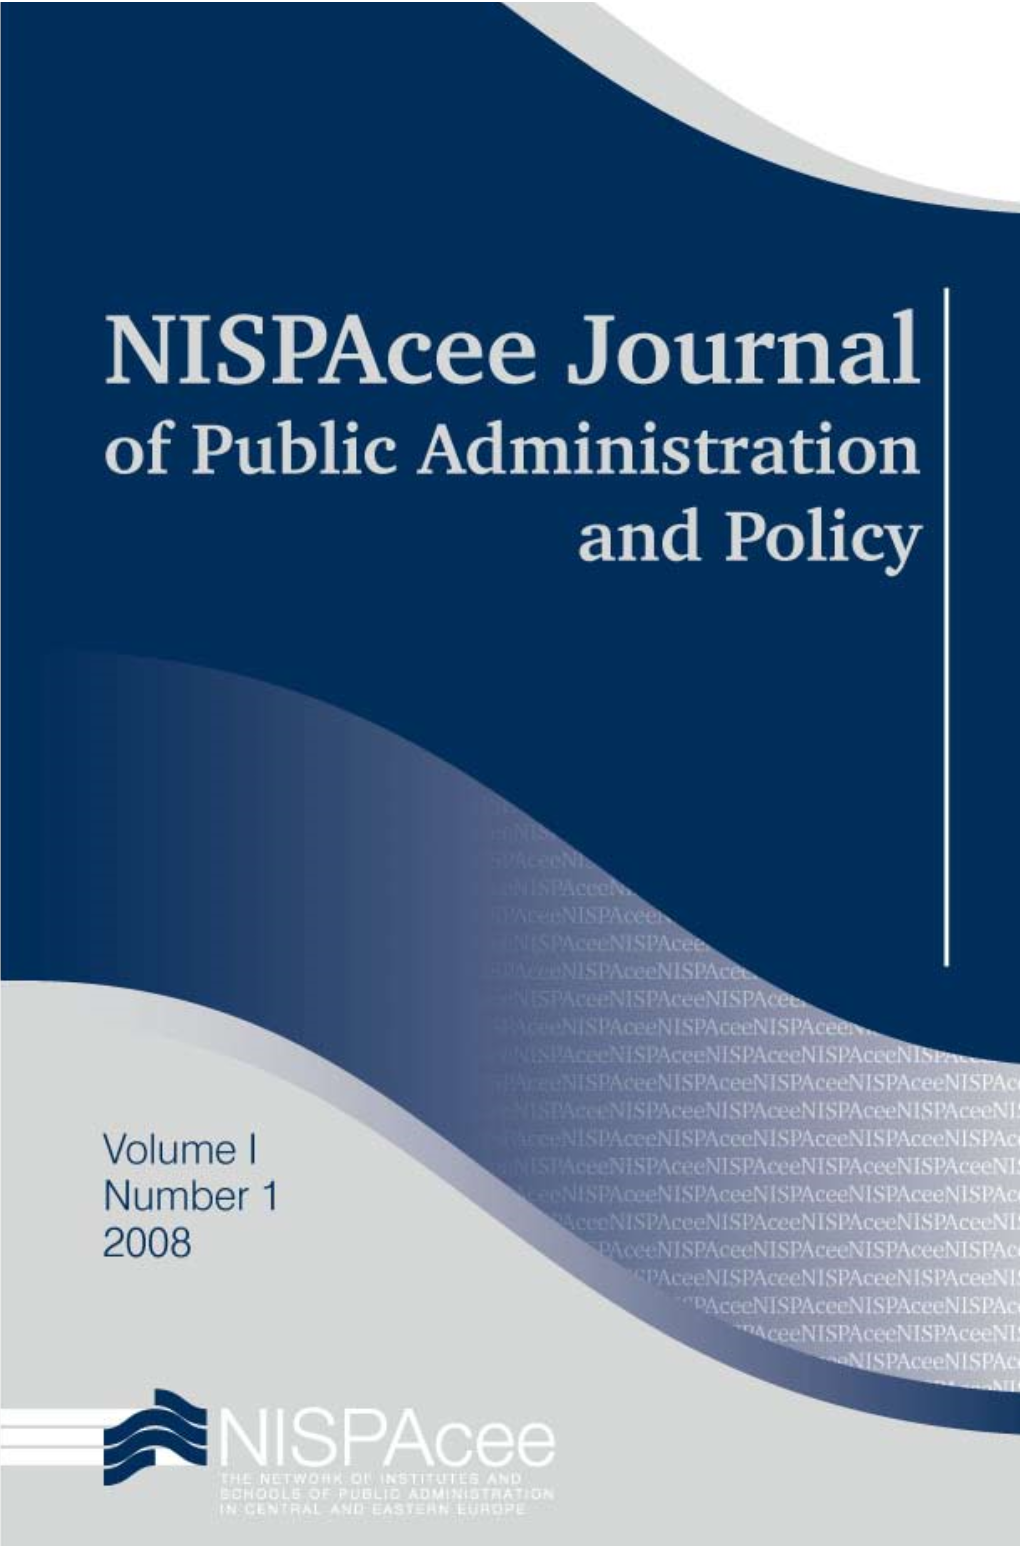 Nispacee Journal of Public Administration and Policy